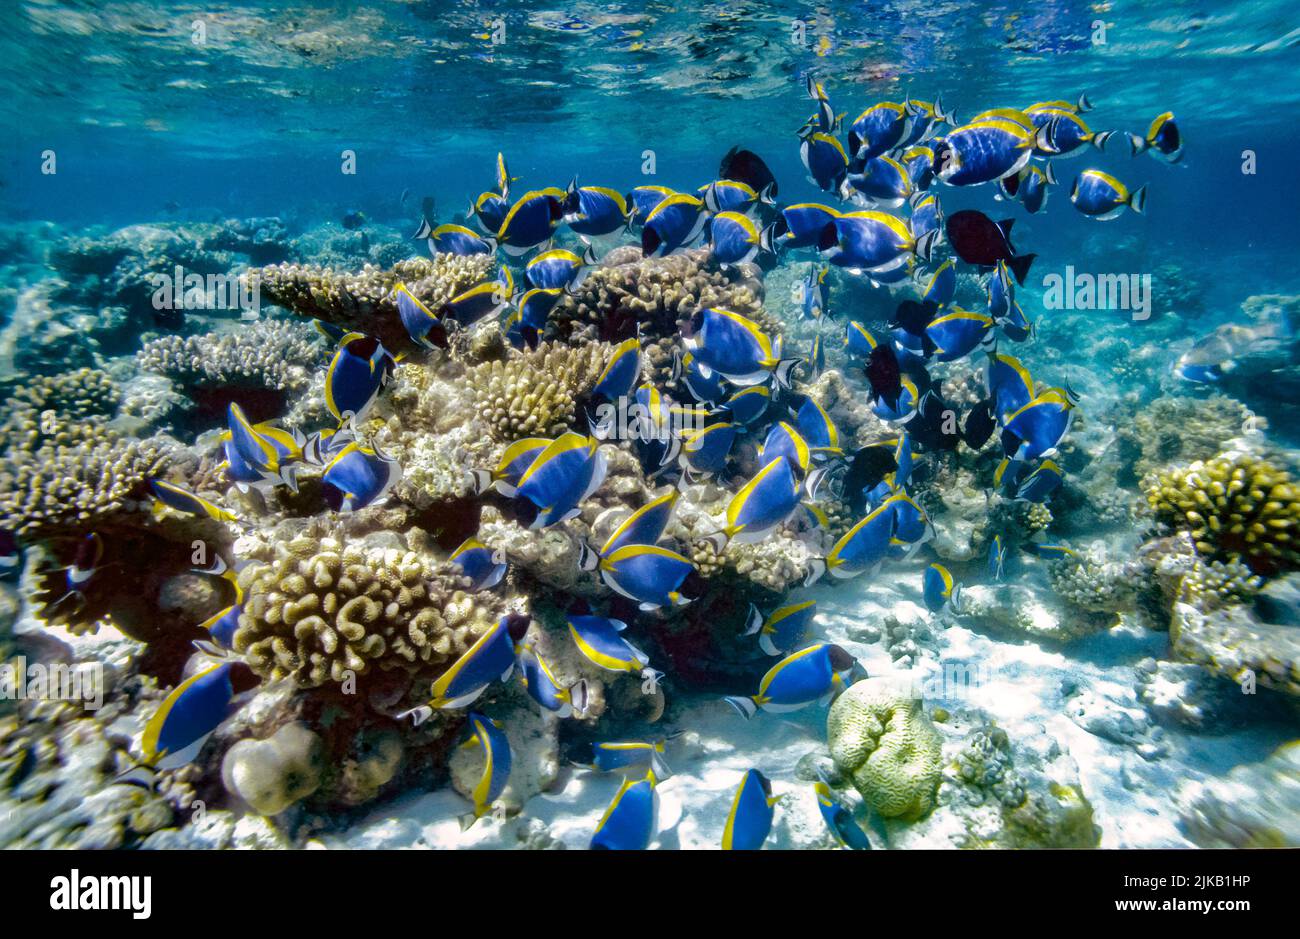 Social feeding groups of the 'Powder Blue Tang', Acanthurus leucosternon, on a shallow reef flat in the Maldives. Stock Photo